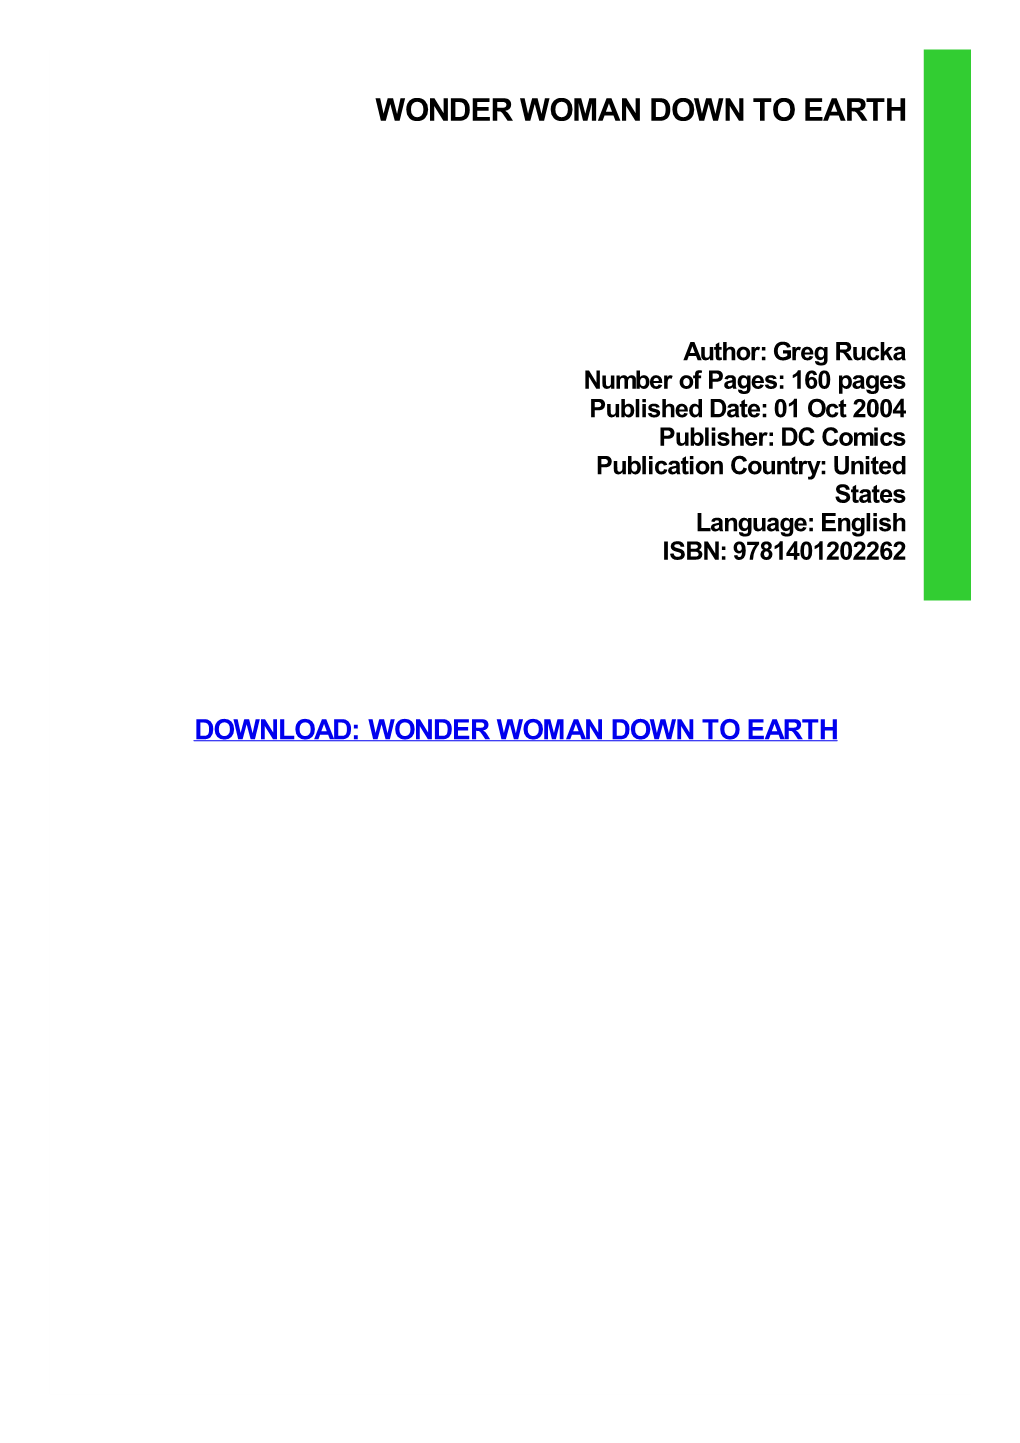 Ebook Download Wonder Woman Down to Earth